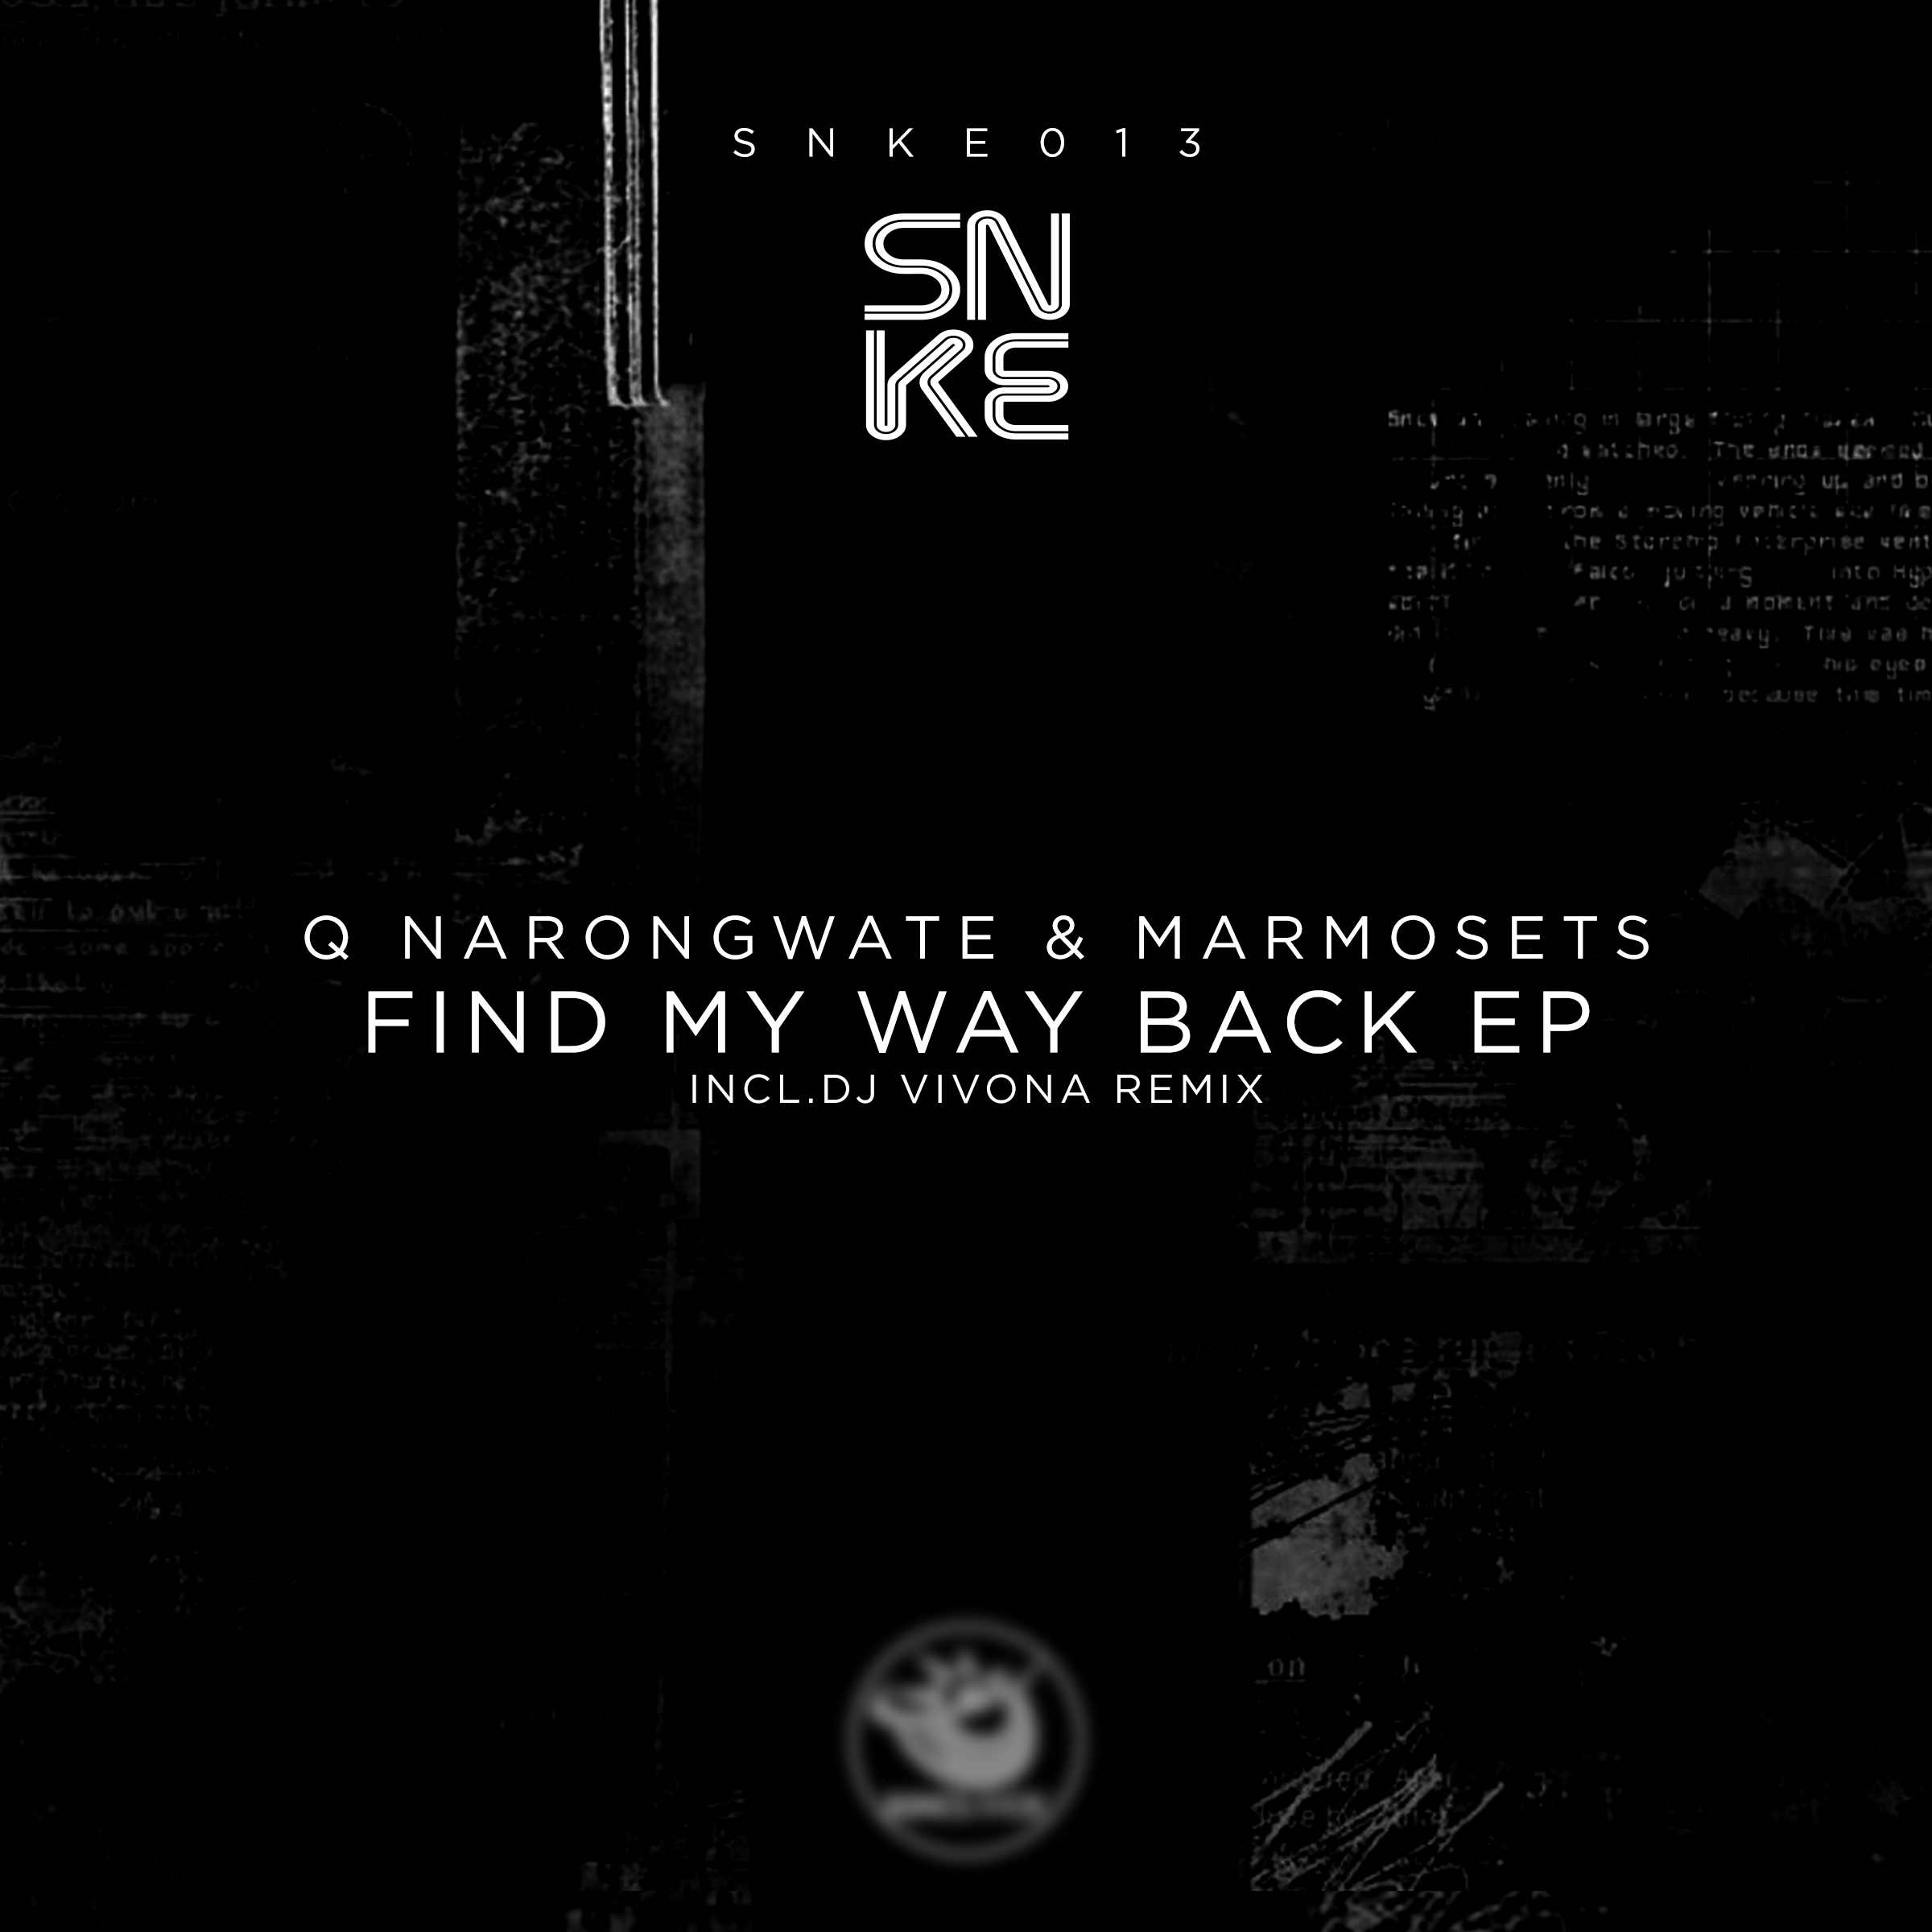 Q Narongwate & Marmosets - Find My Way Back EP (incl. Dj Vivona Remix) - SNKE013 Cover